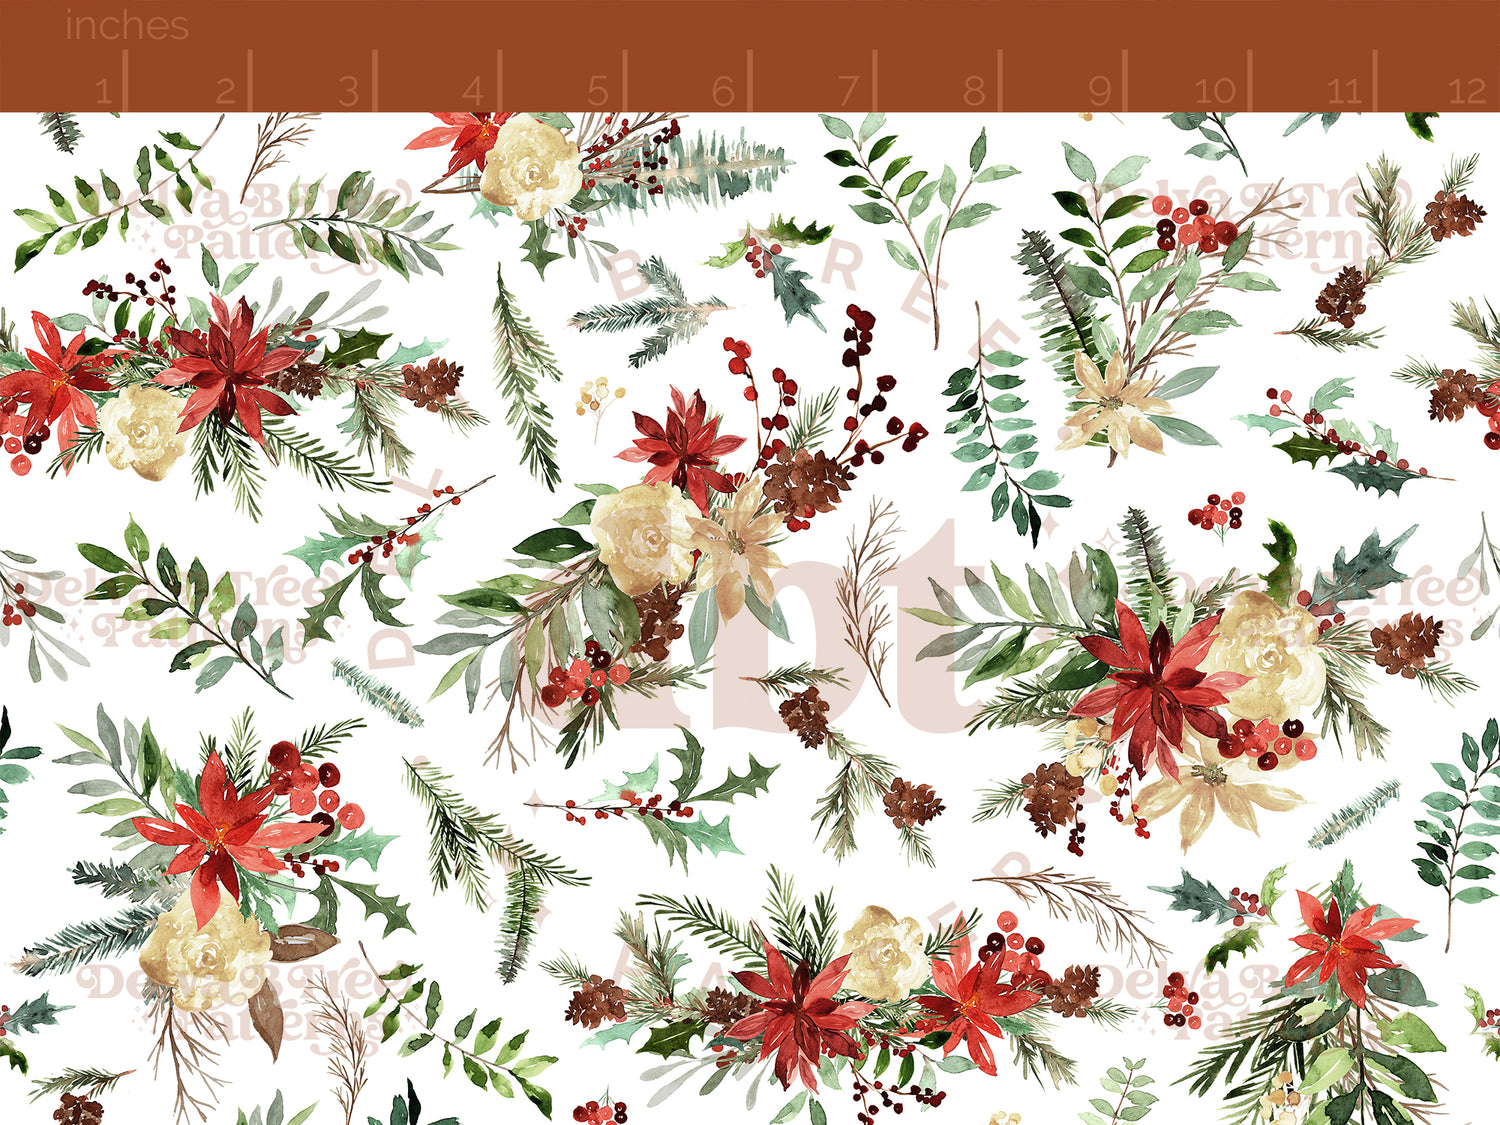 Tossed red watercolor poinsettias, off white flowers, pinecones, holly leaves, mistletoe and winter berries seamless pattern scale, digital file for small shops that make handmade products in small batches.